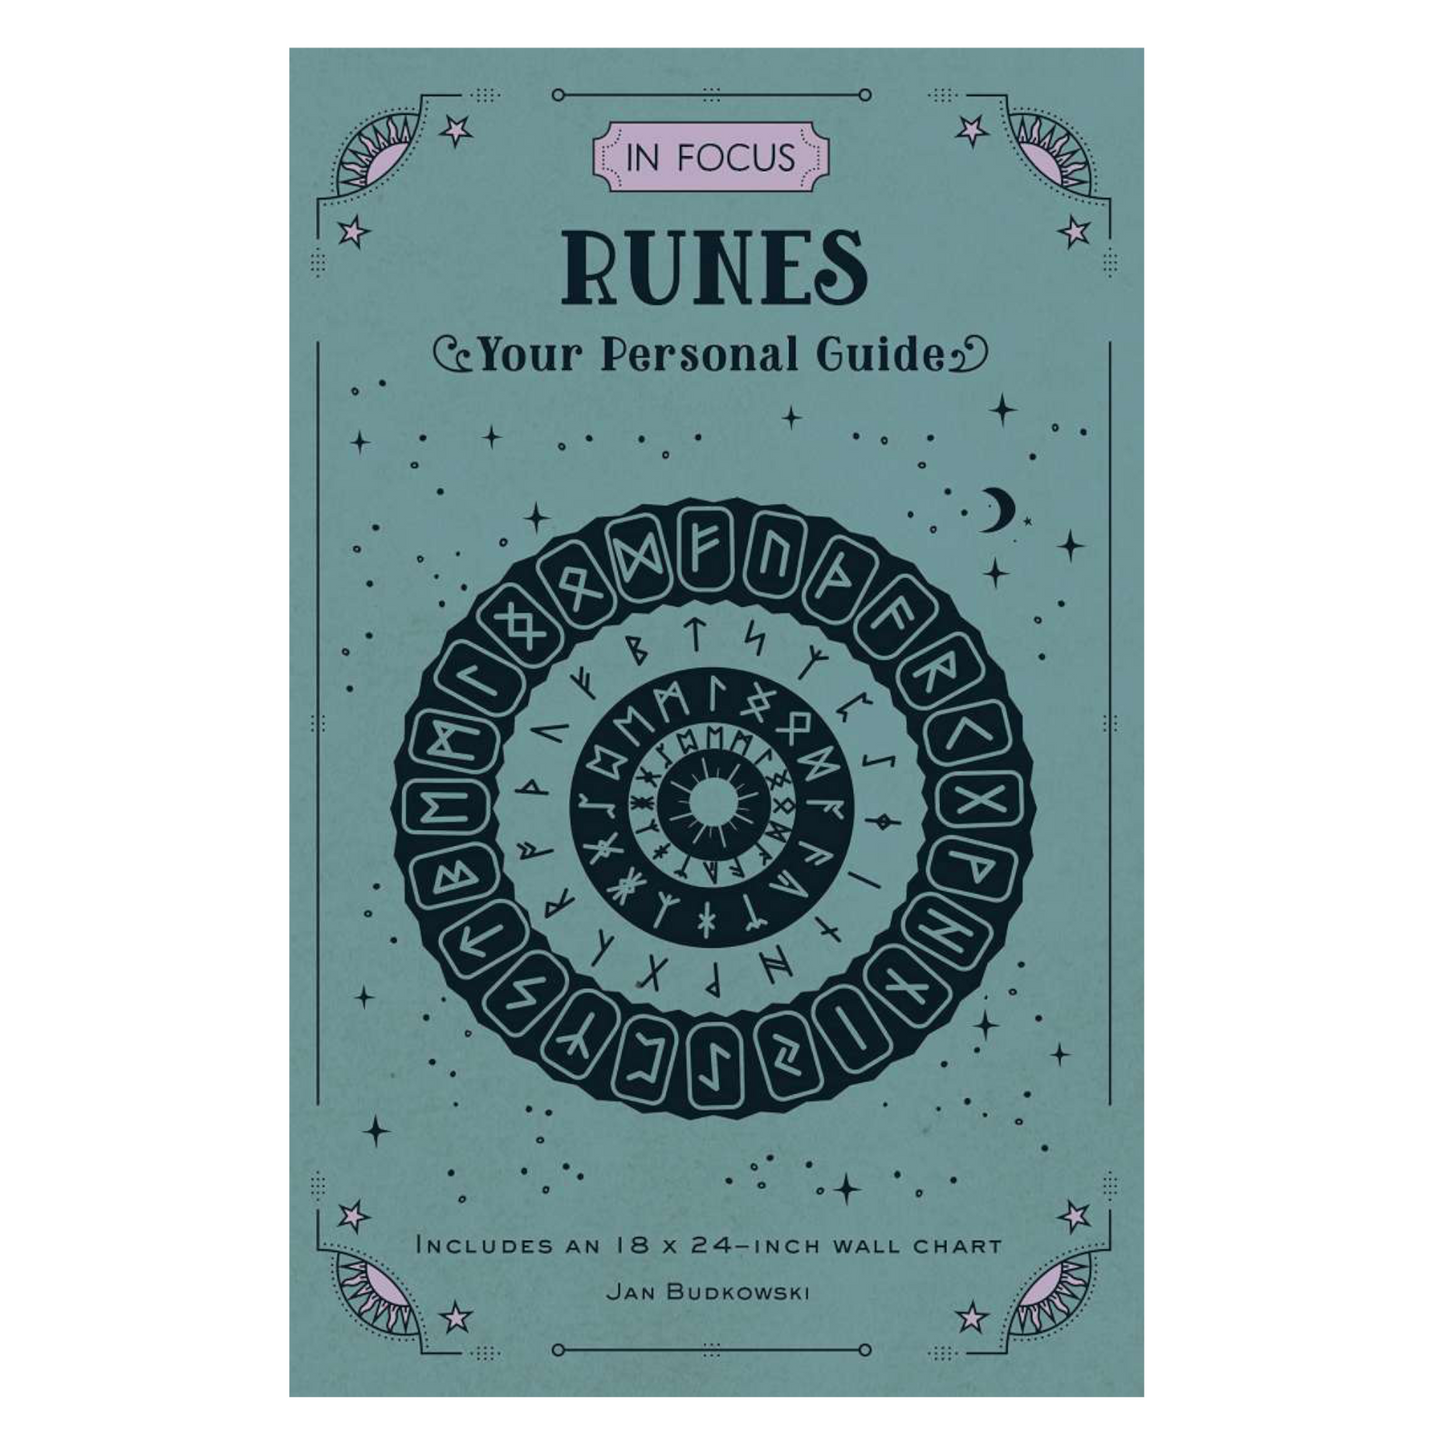 In Focus: Runes - Your Personal Guide